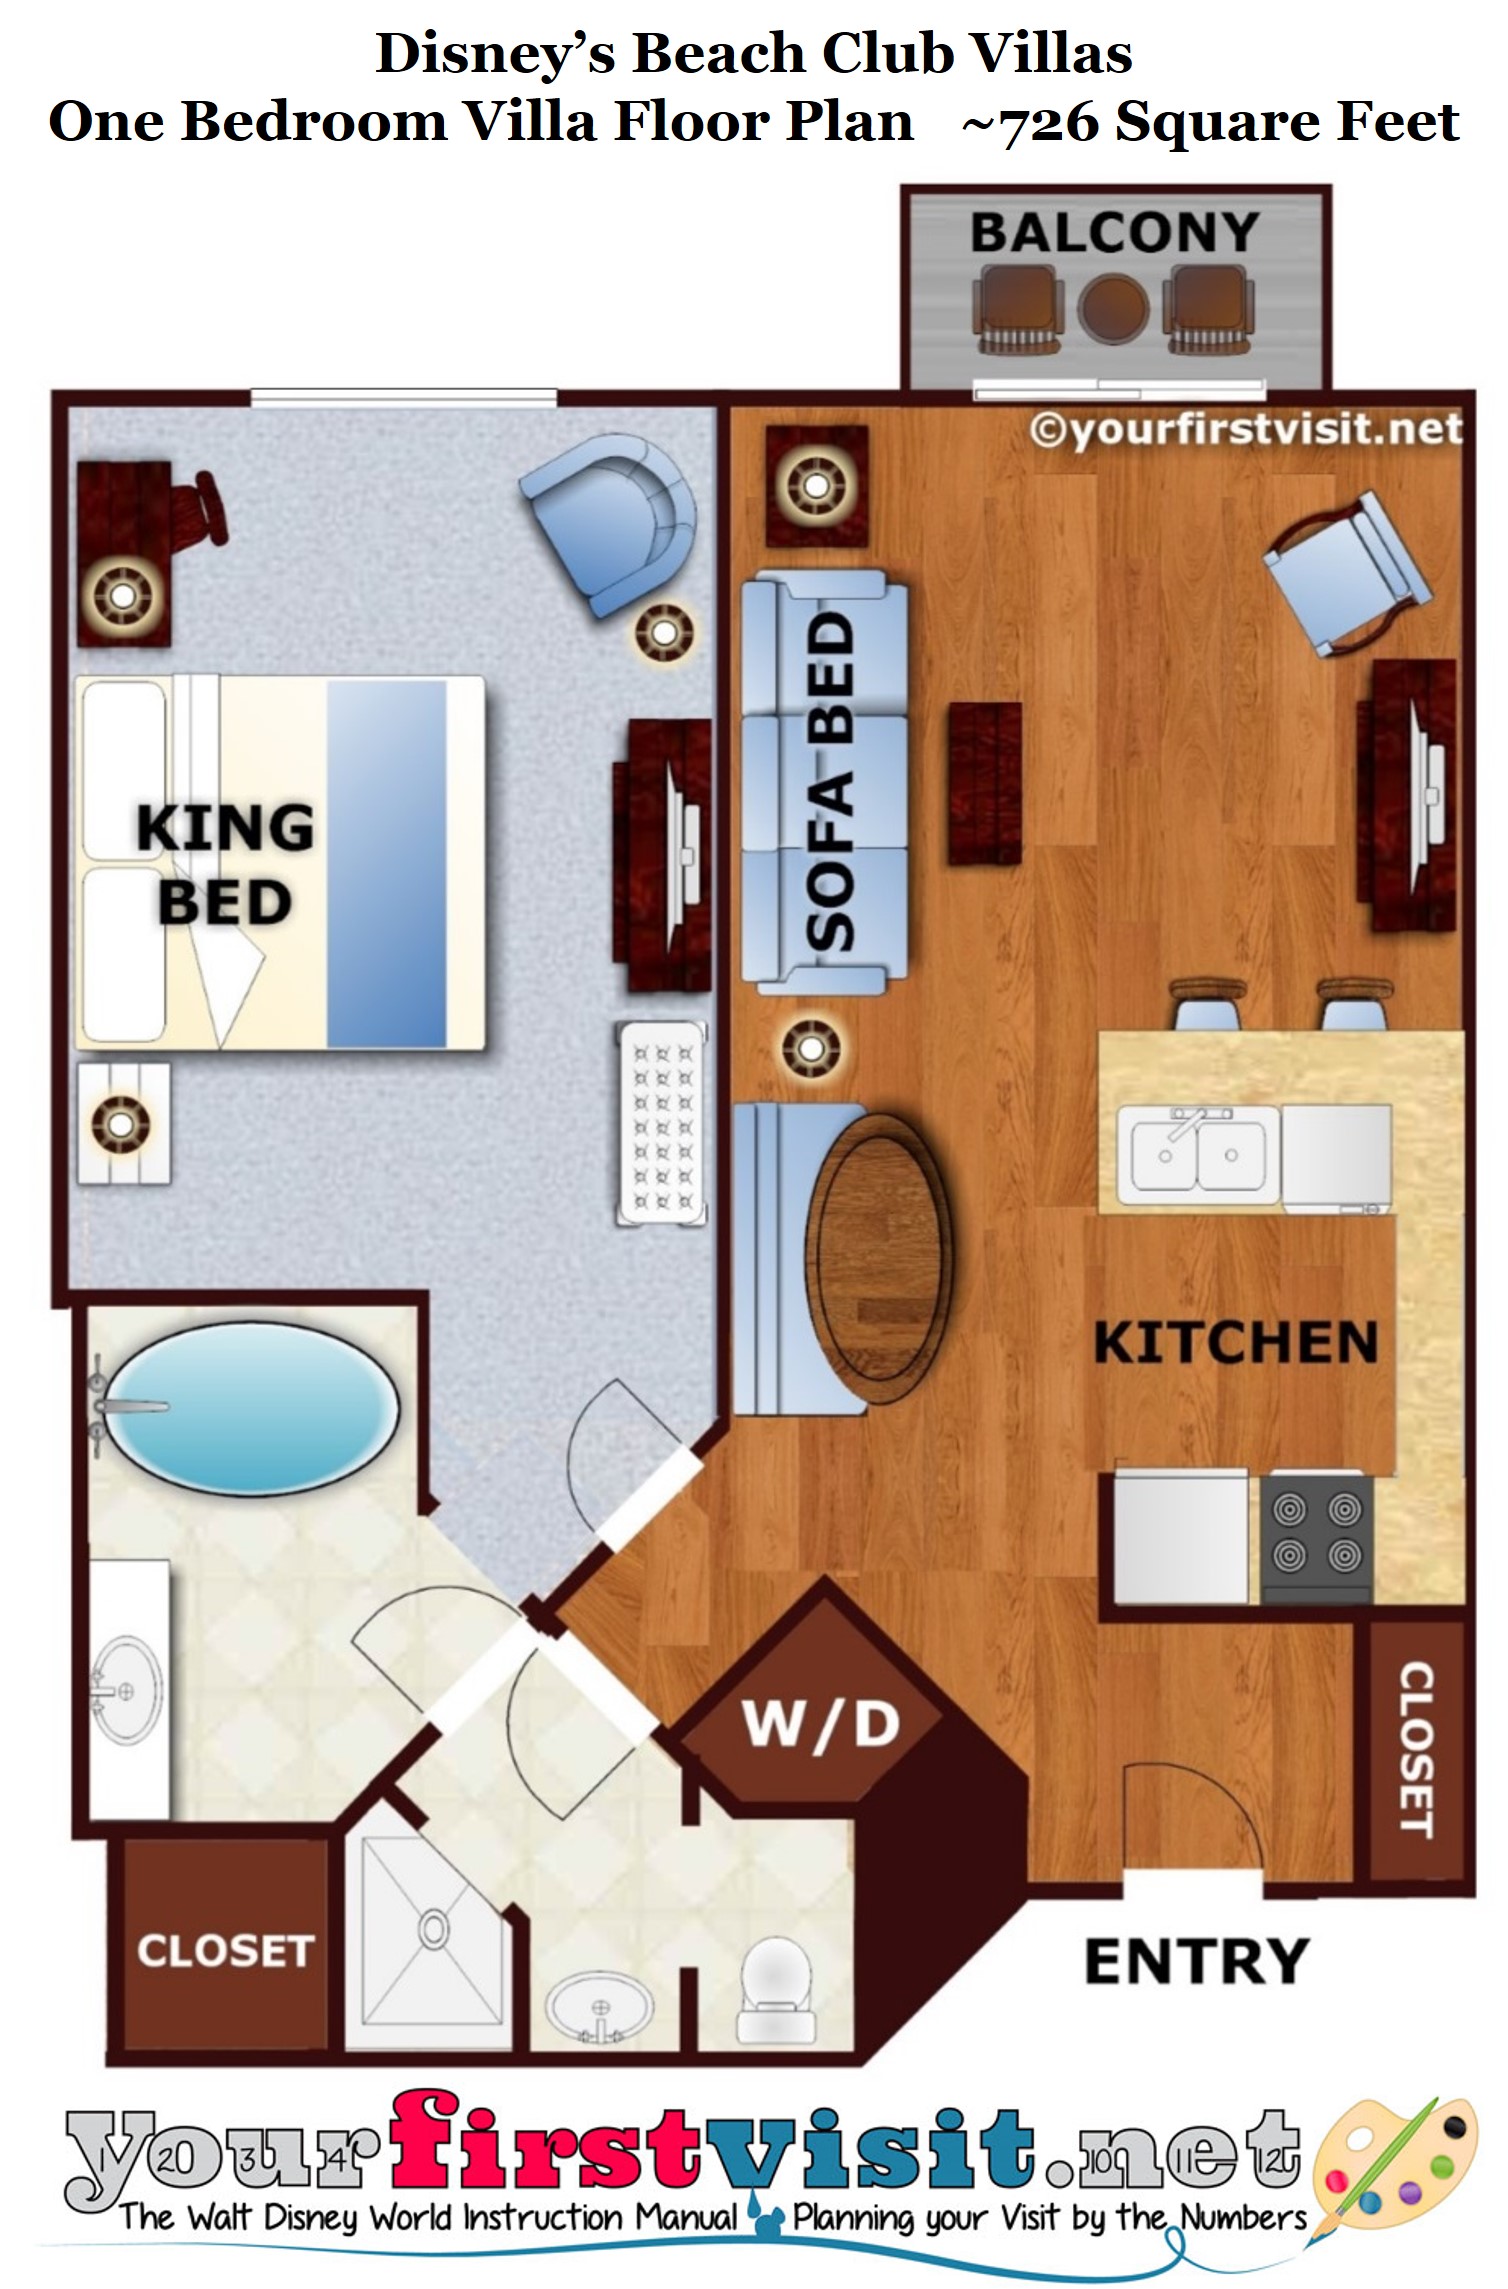 The Living/Dining/Kitchen Space of One and Two Bedroom Villas at Disney